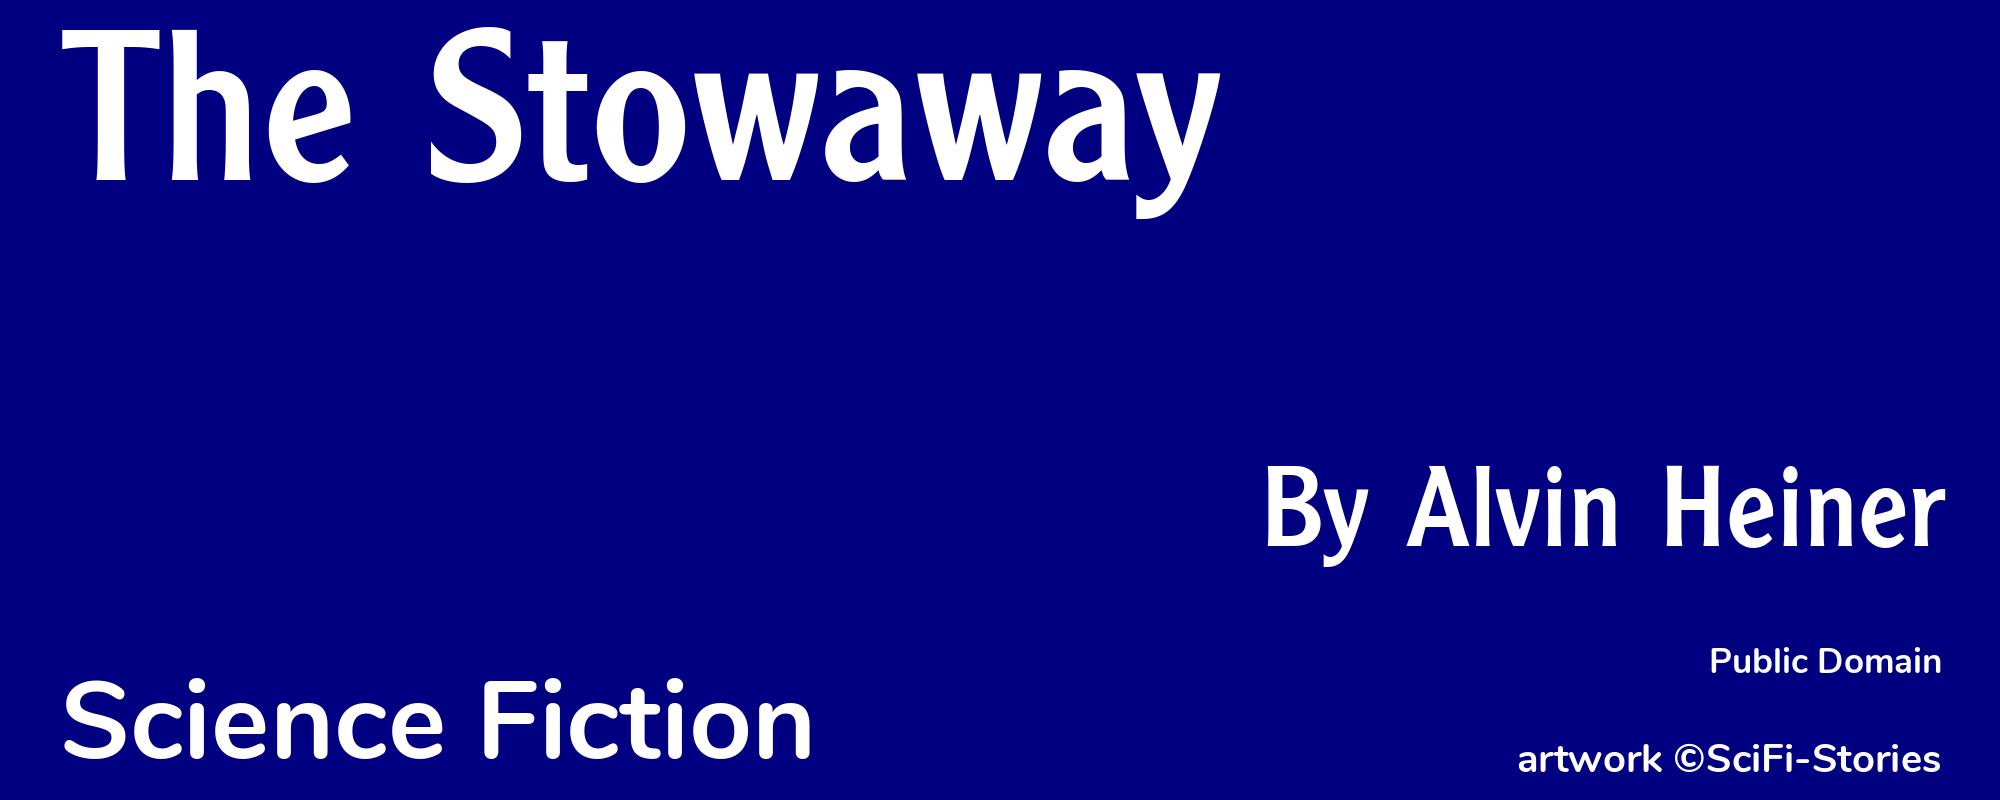 The Stowaway - Cover